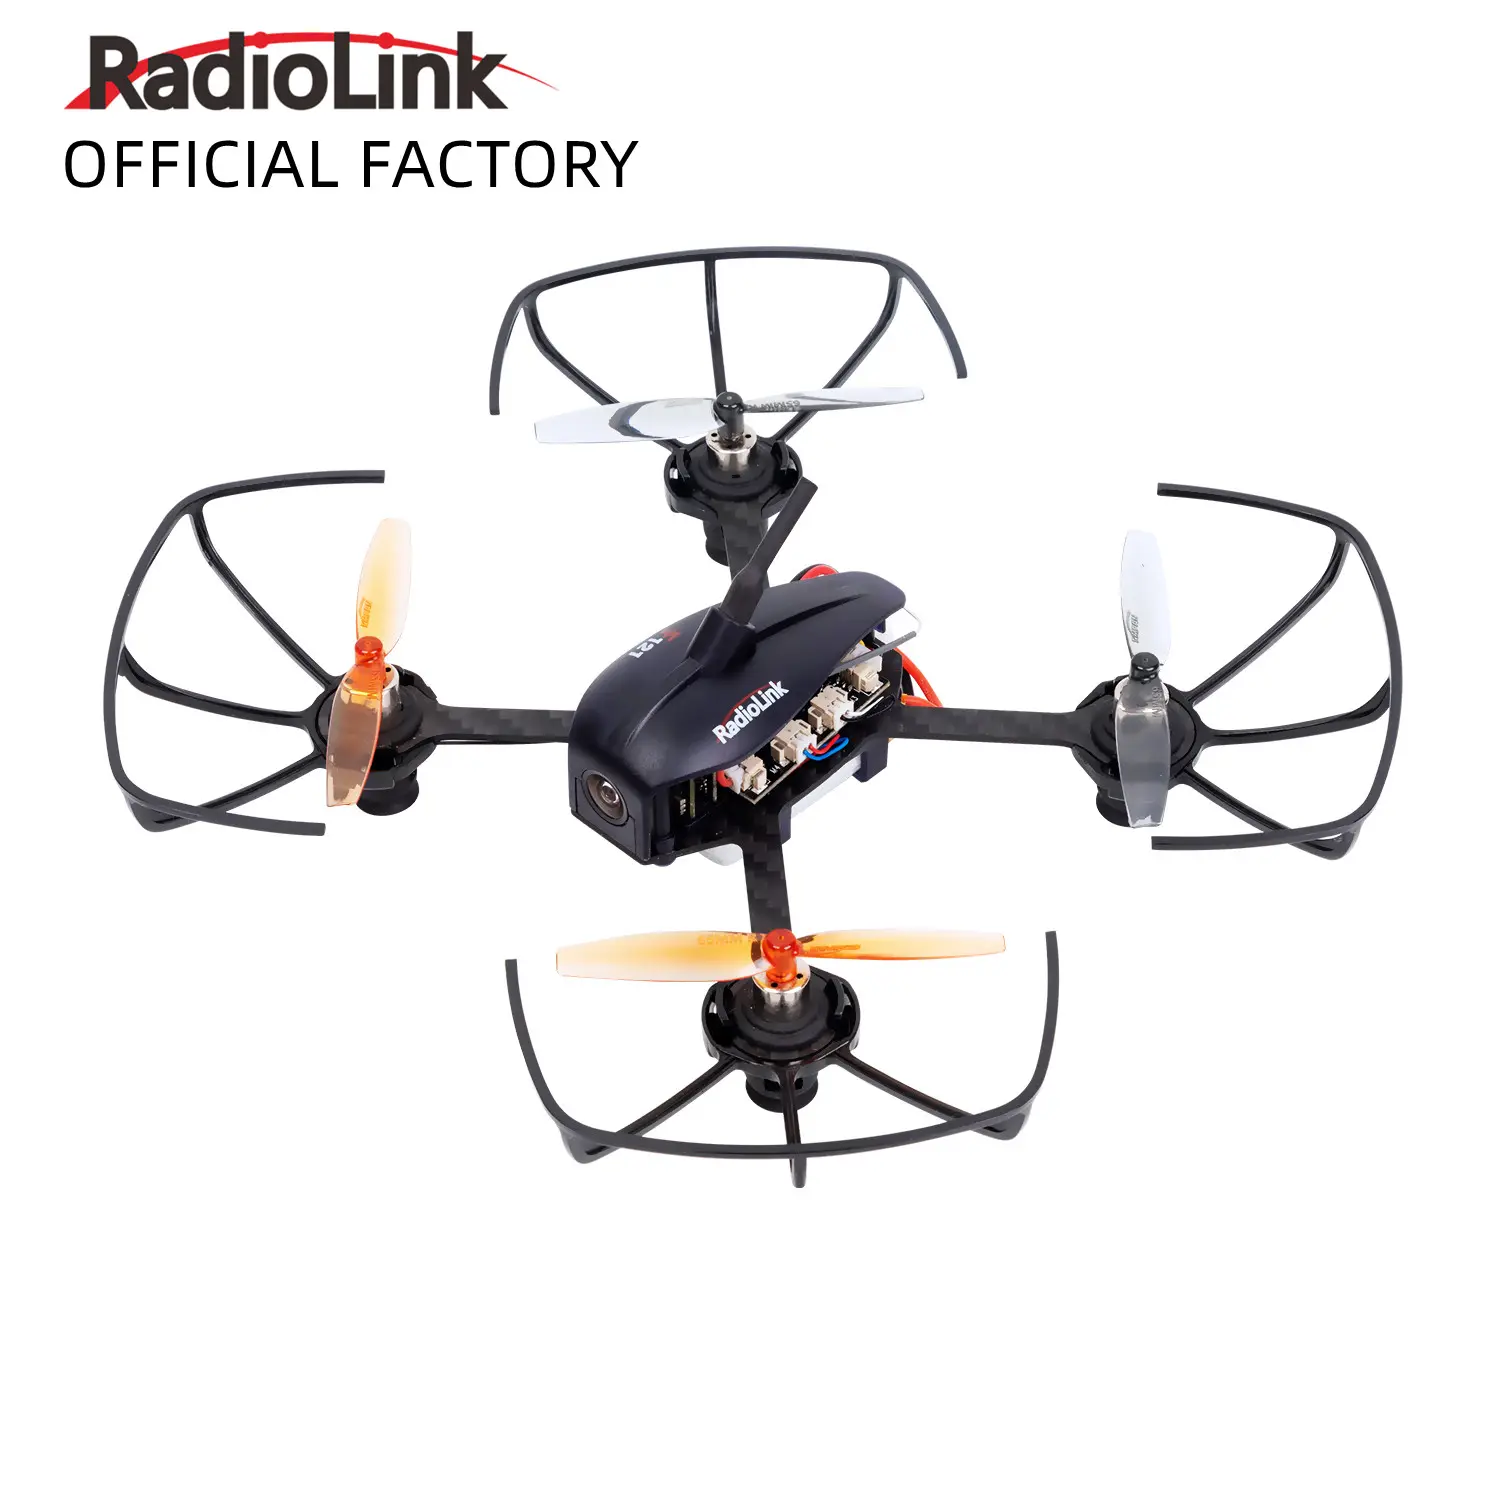 Hot Sale Radiolink Official Factory F121 Racing Drone 121MM Mini Quad 3 Flight Mode for Education Kids Training Outdoor/Indoor